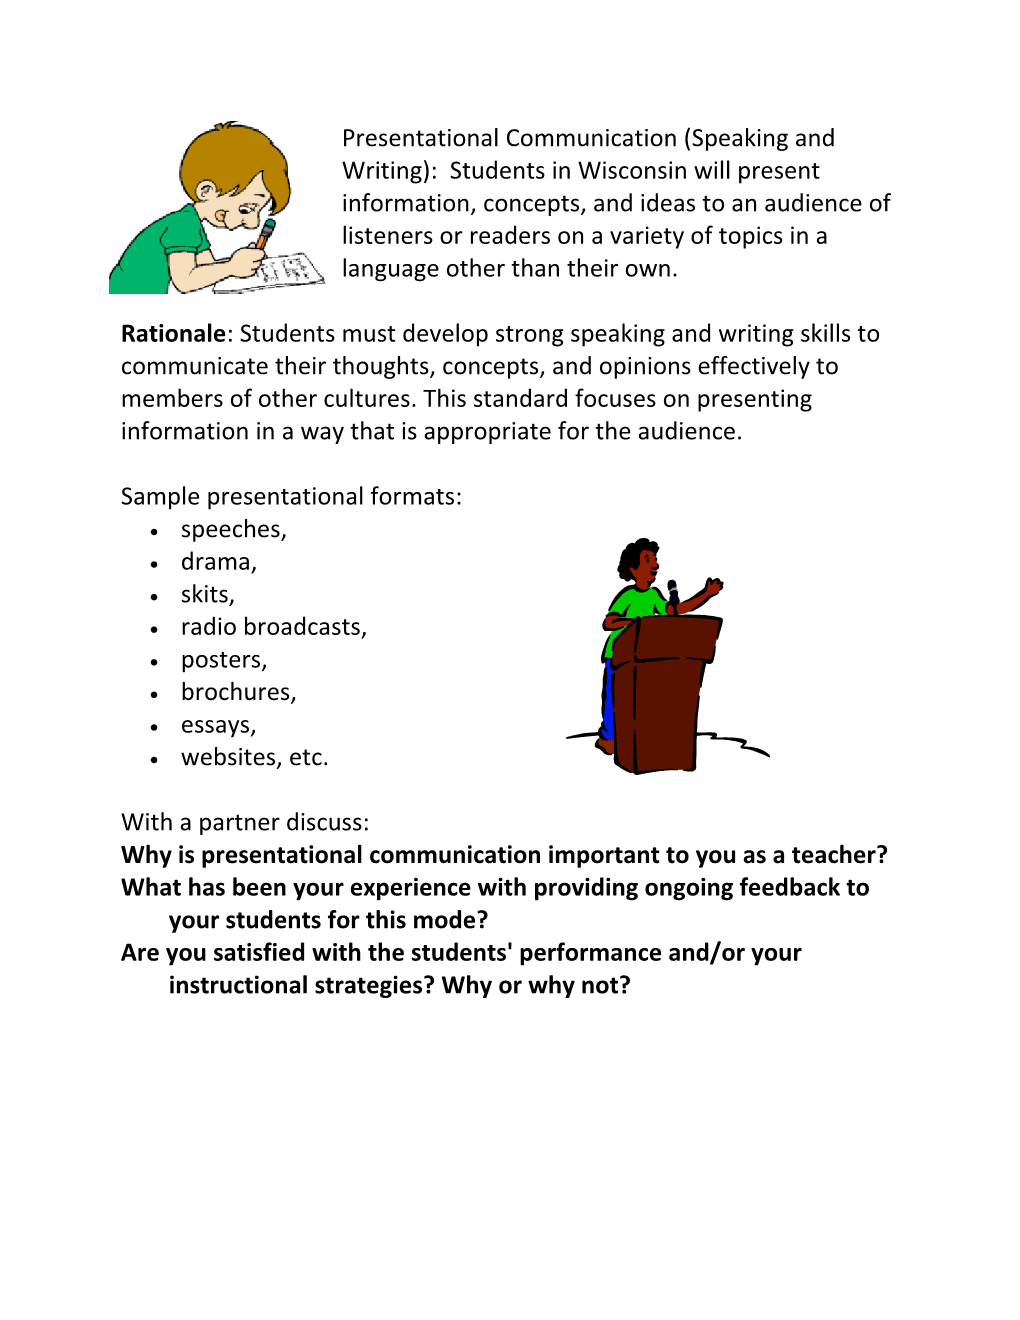 Why Is Presentational Communication Important to You As a Teacher?